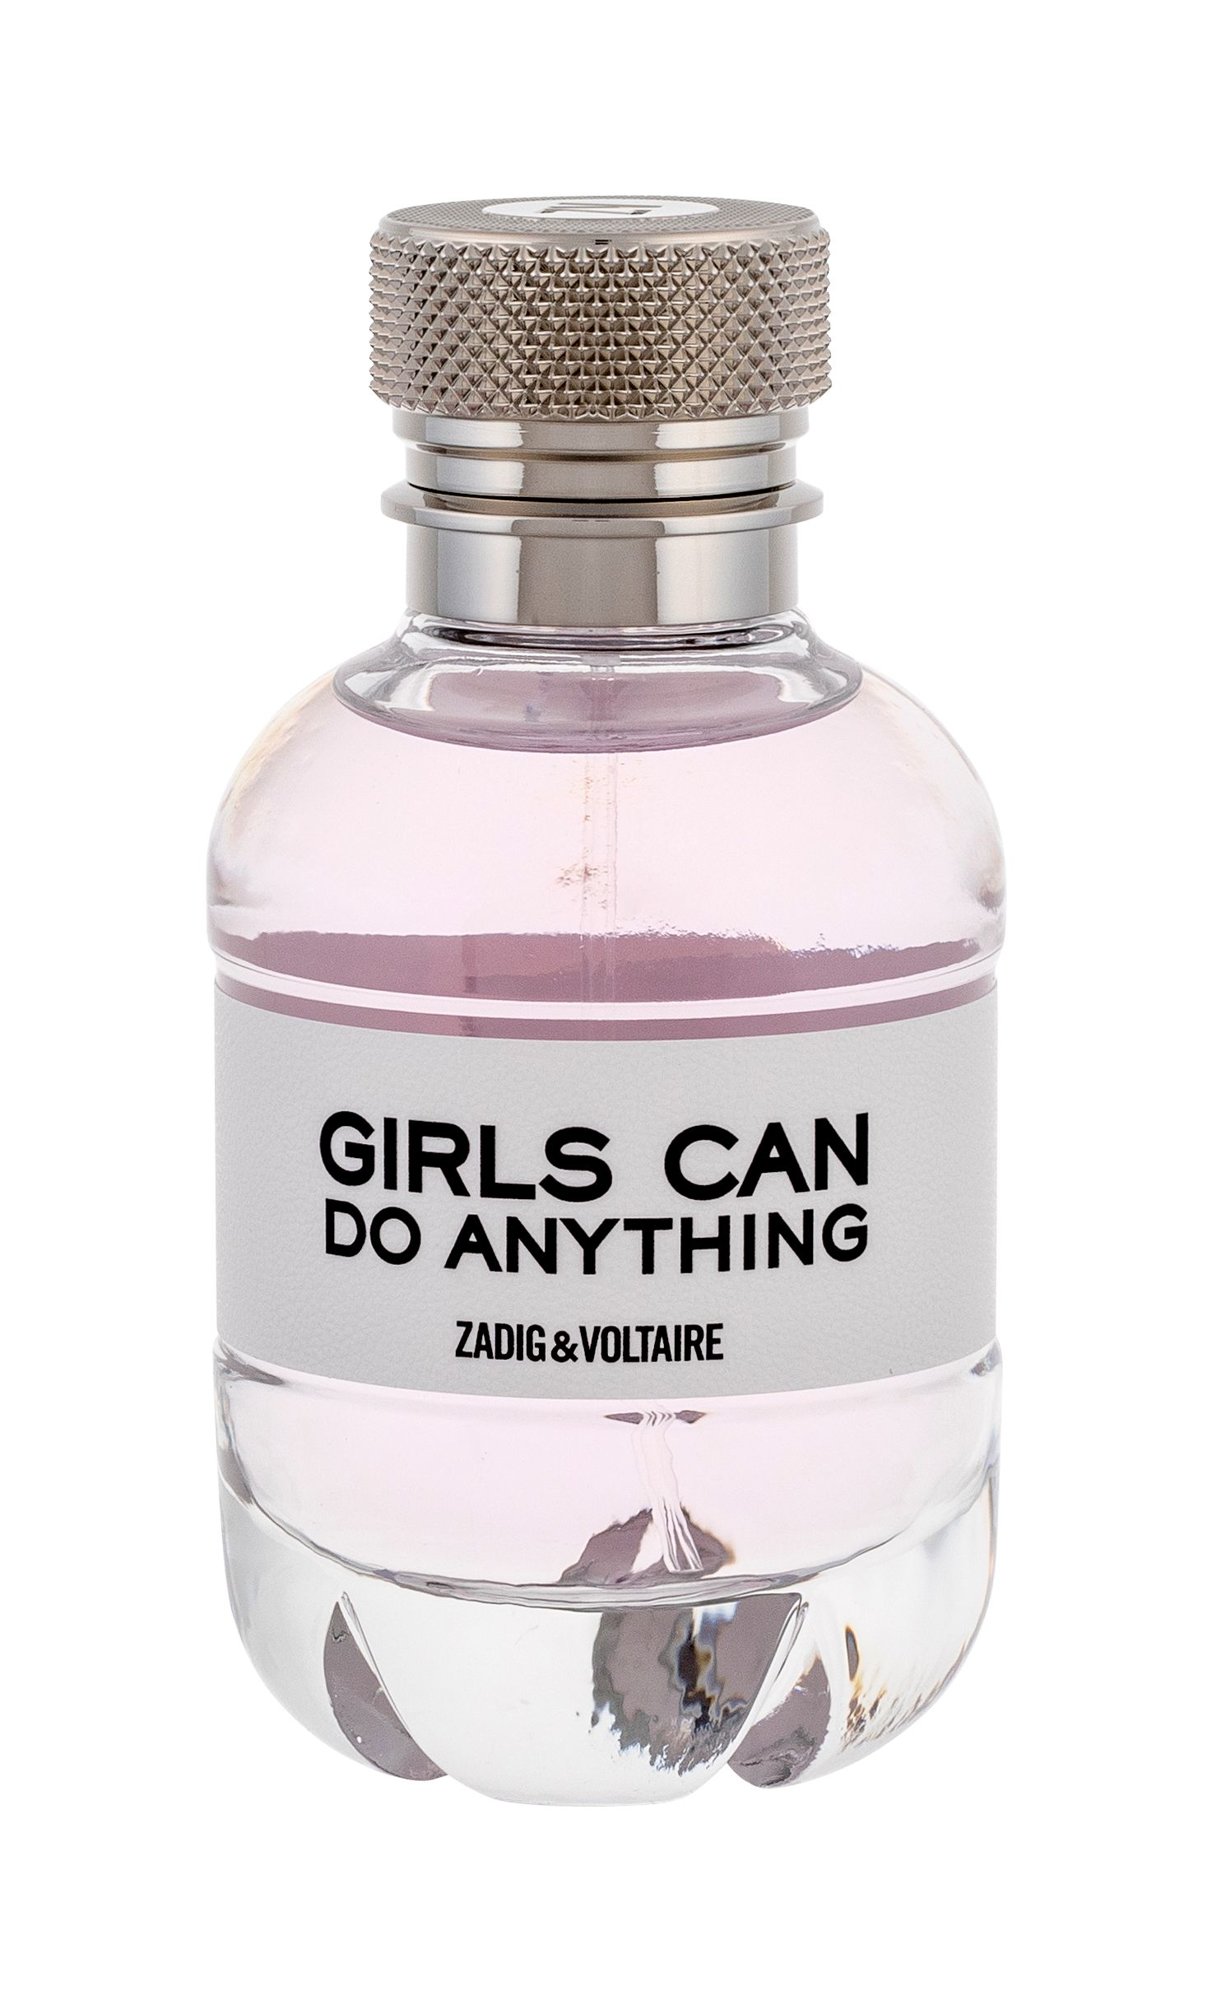 Zadig & Voltaire Girls Can Do Anything, Parfumovaná voda 50ml